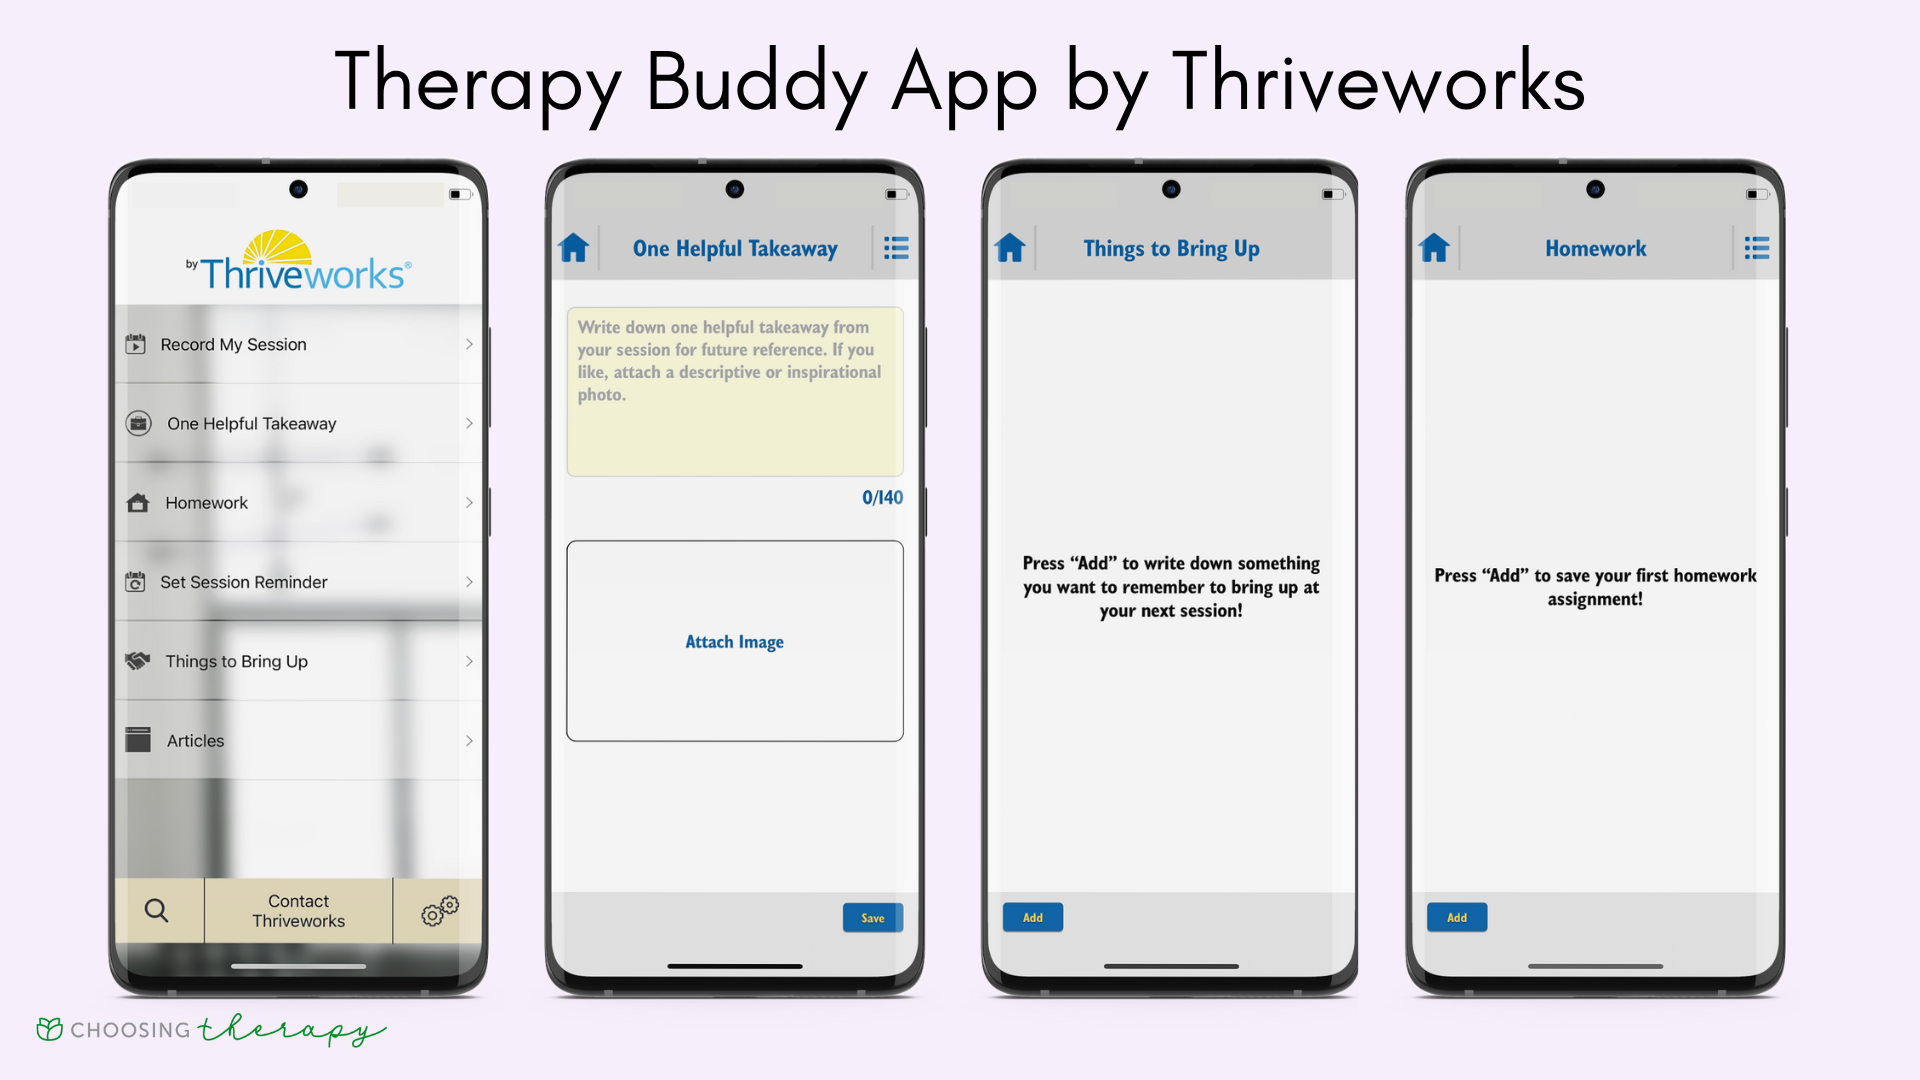 Thriveworks Review 2022 - Image of the key features in the Therapy Buddy app